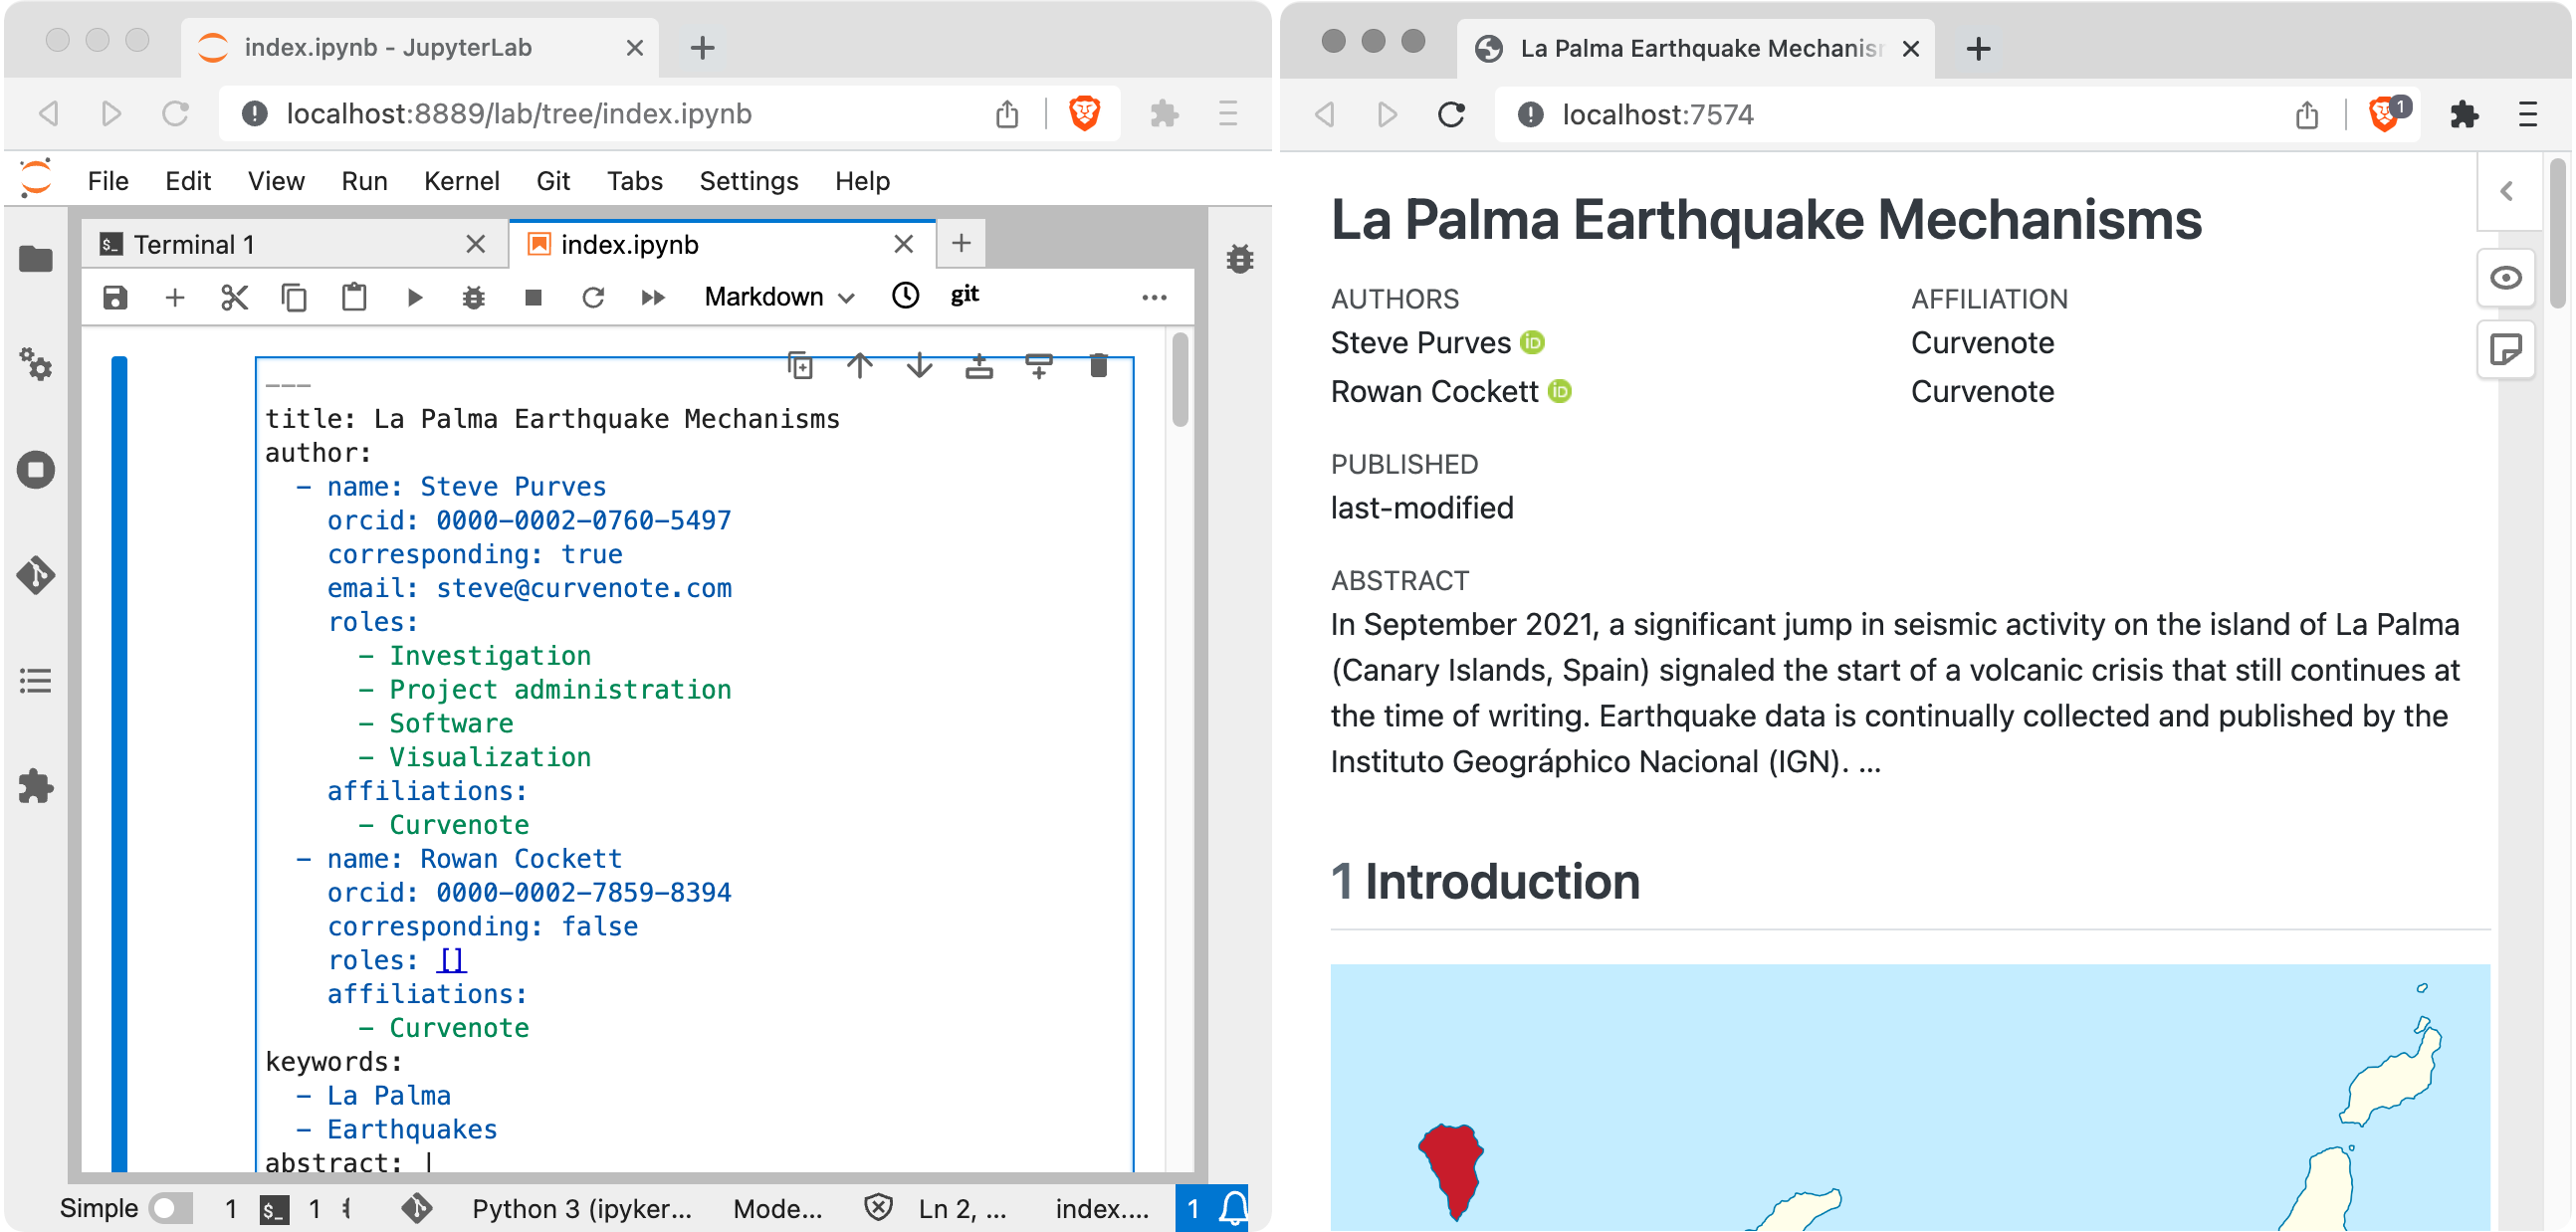 Screenshot of two browser windows. On the left, Jupypter Lab with the file index.ipynb open, the first cell in edit mode, and with the text title: La Palma Earthquake Mechanisms. On the right, the article webpage with the title La Palma Earthquake Mechanisms.